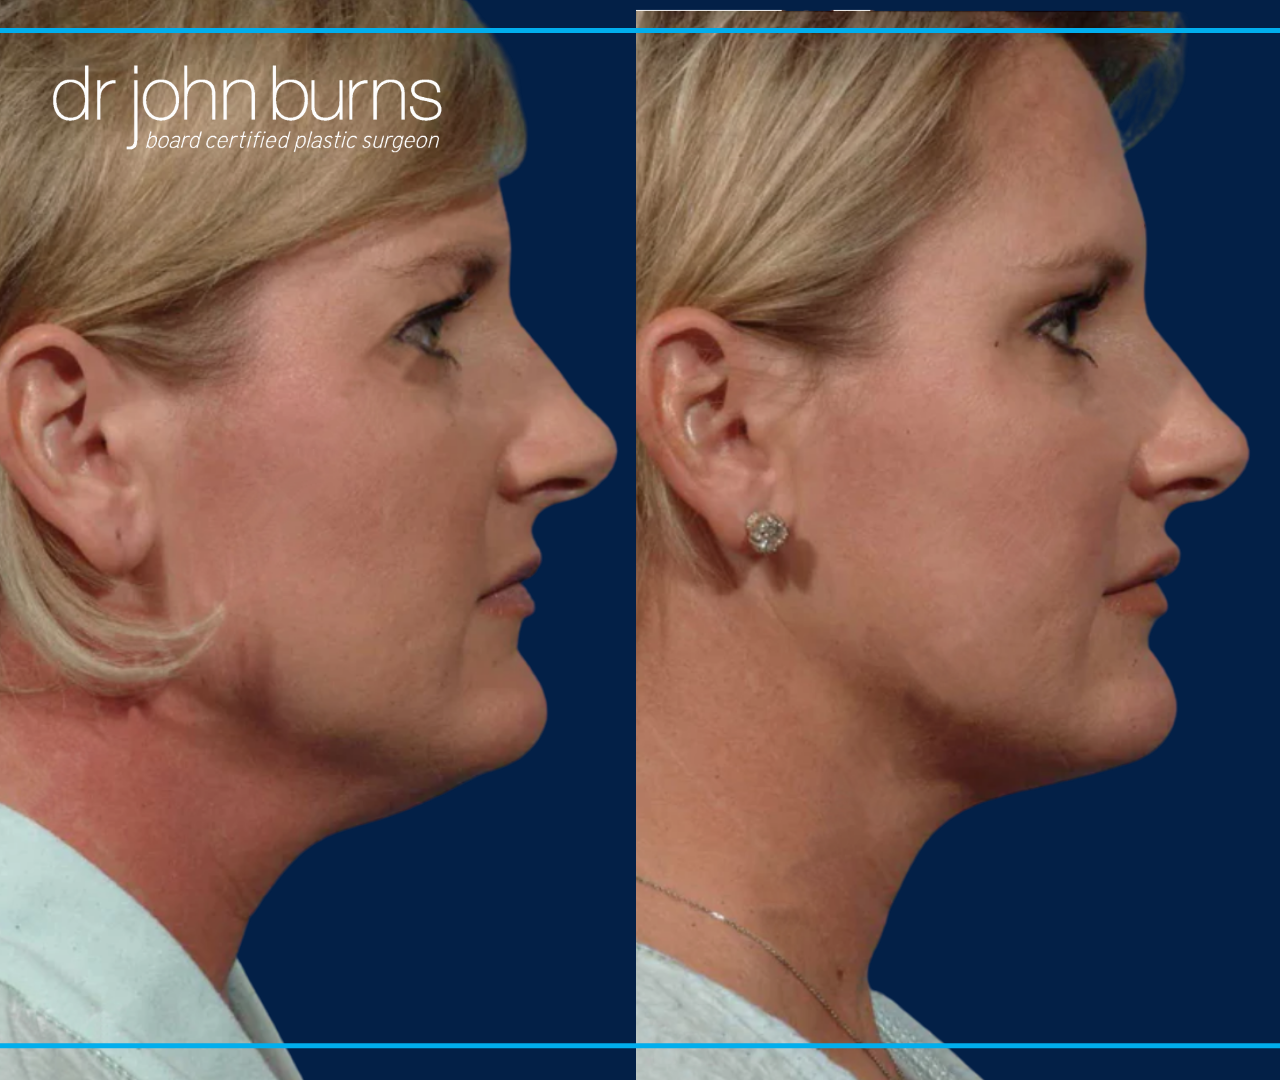 Profile View | Before and After Neck Lift by Dallas Plastic Surgeon, Dr. John Burns